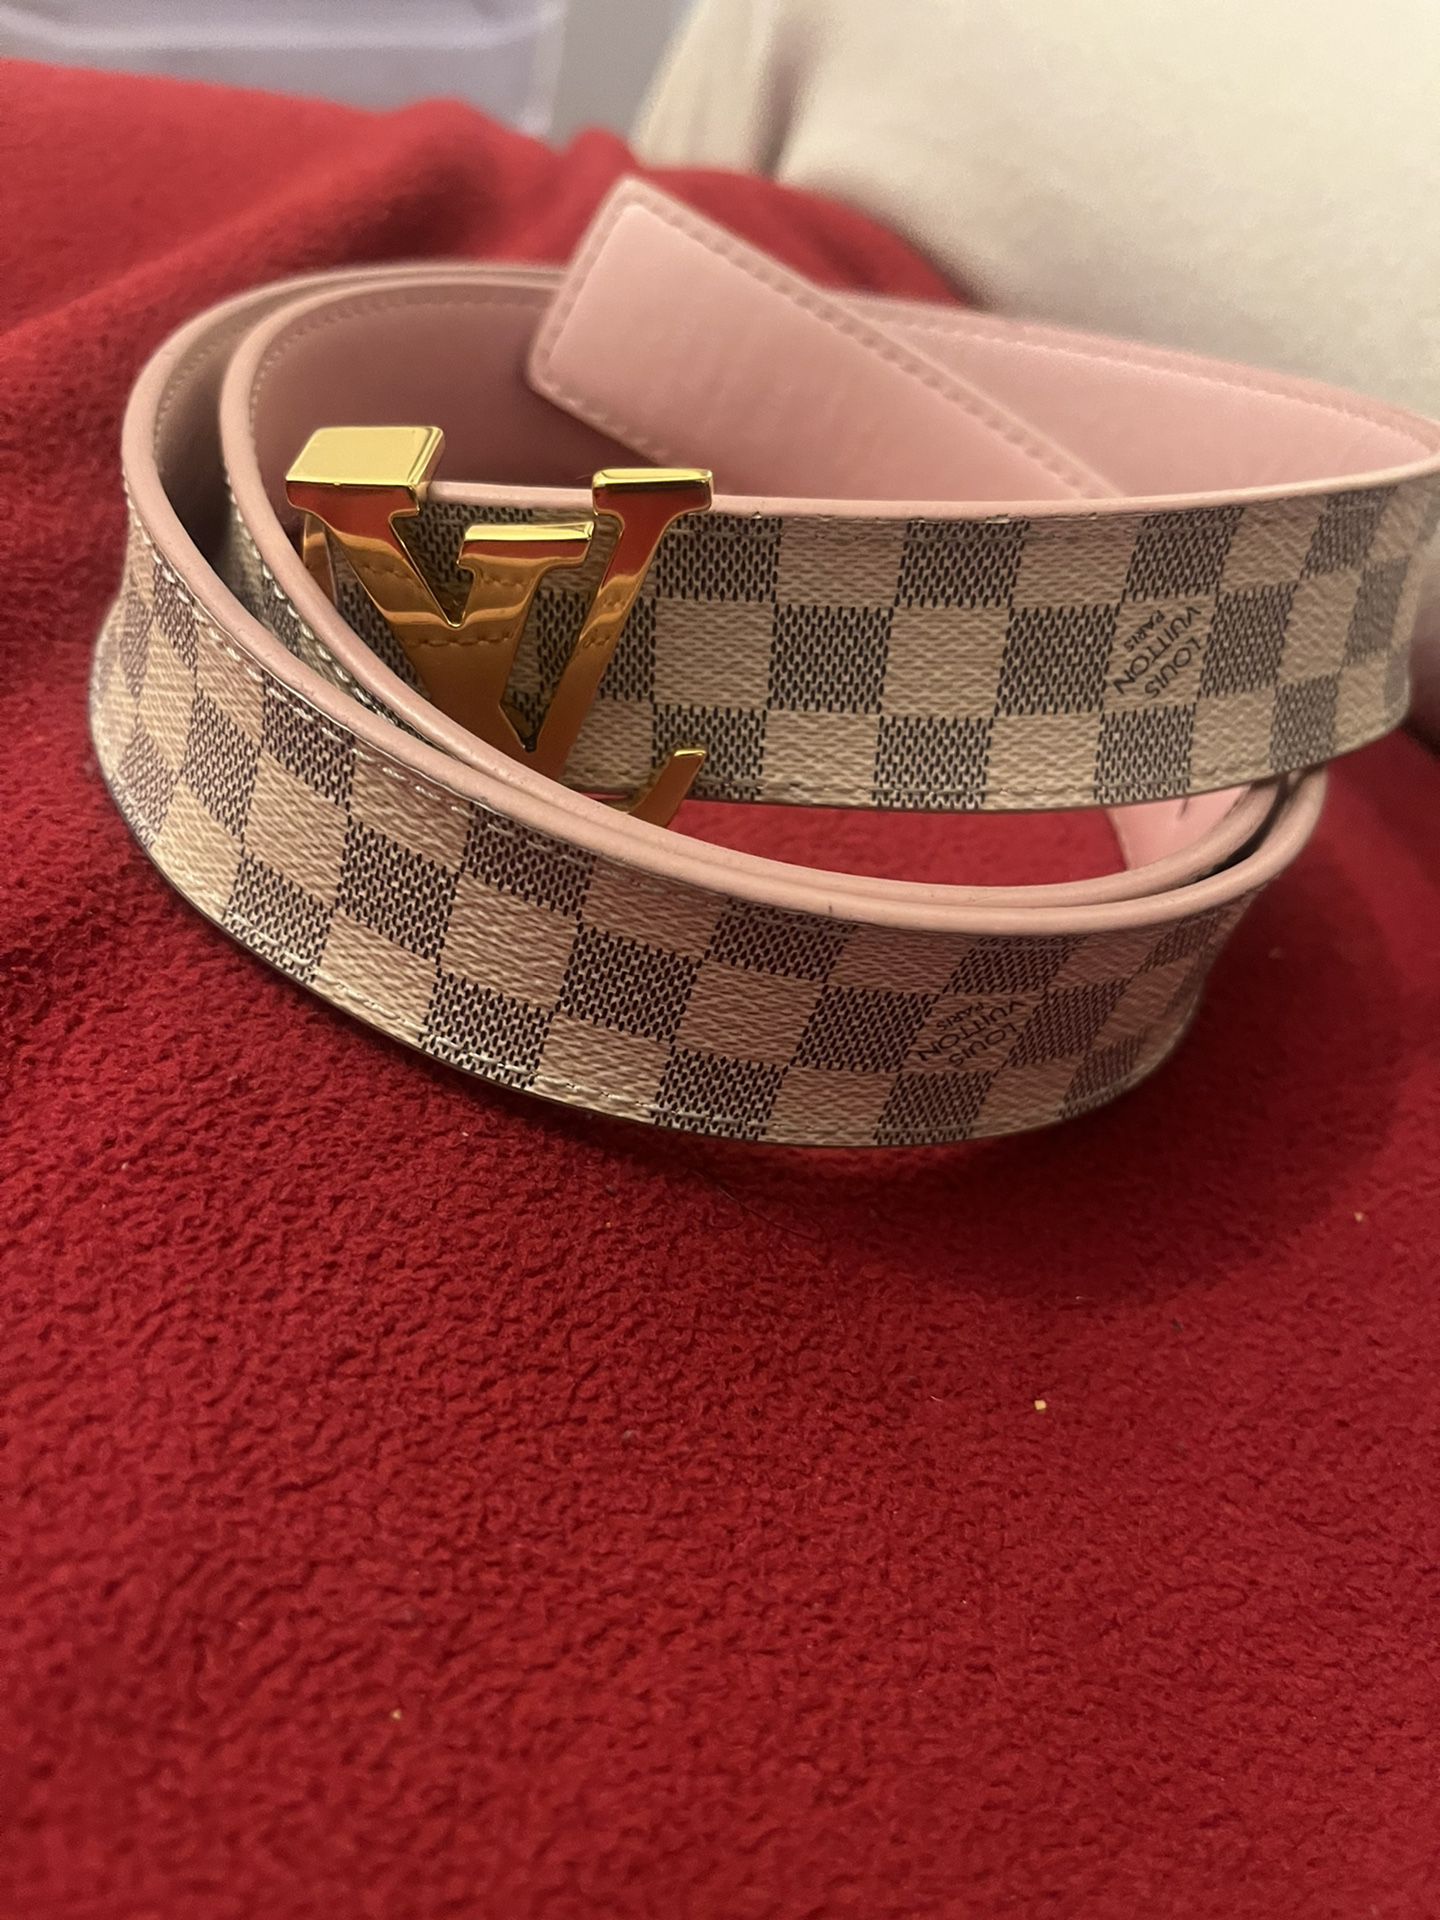 Louis Vuitton Belt Size 75/30 Fits If You Are A Size Small Or Xsmall Jean  Size 0 Or 1,3 for Sale in San Jose, CA - OfferUp